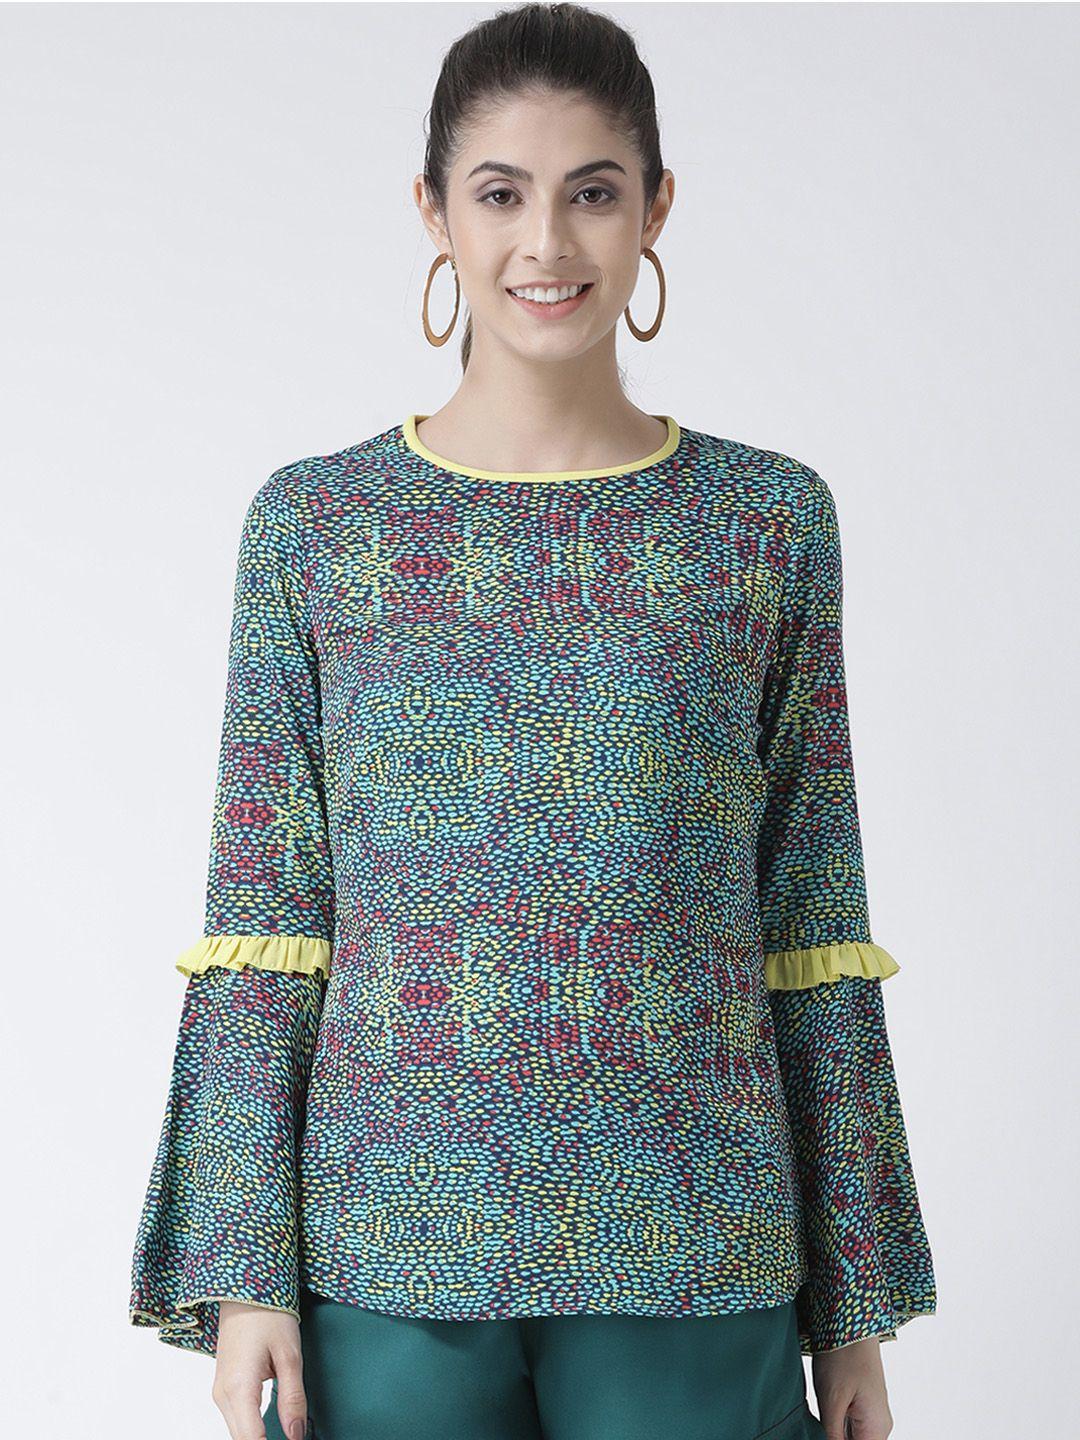 KASSUALLY Women Yellow & Blue Printed A-Line Top